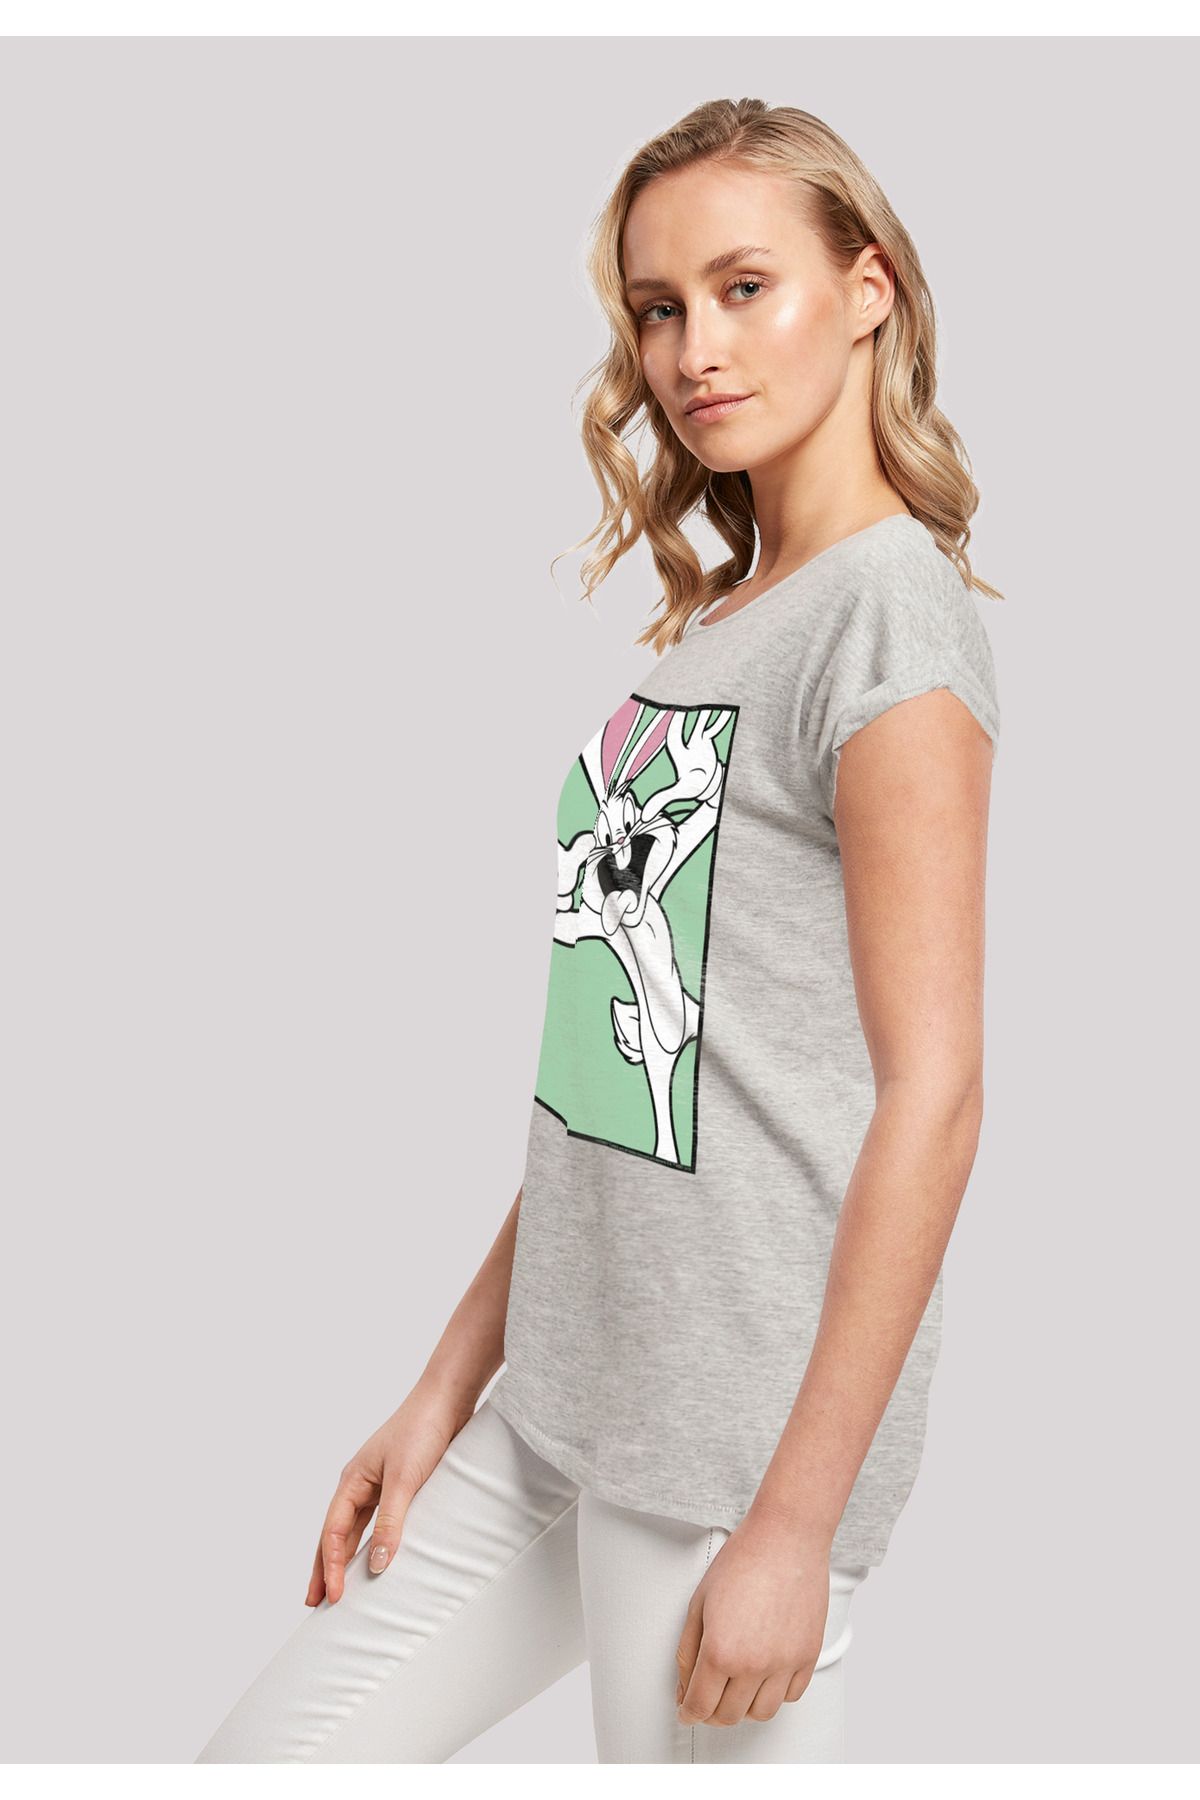 Tunes Shoulder F4NT4STIC - Funny Looney Face-WHT Extended Ladies Tee Trendyol Bugs Damen Bunny mit